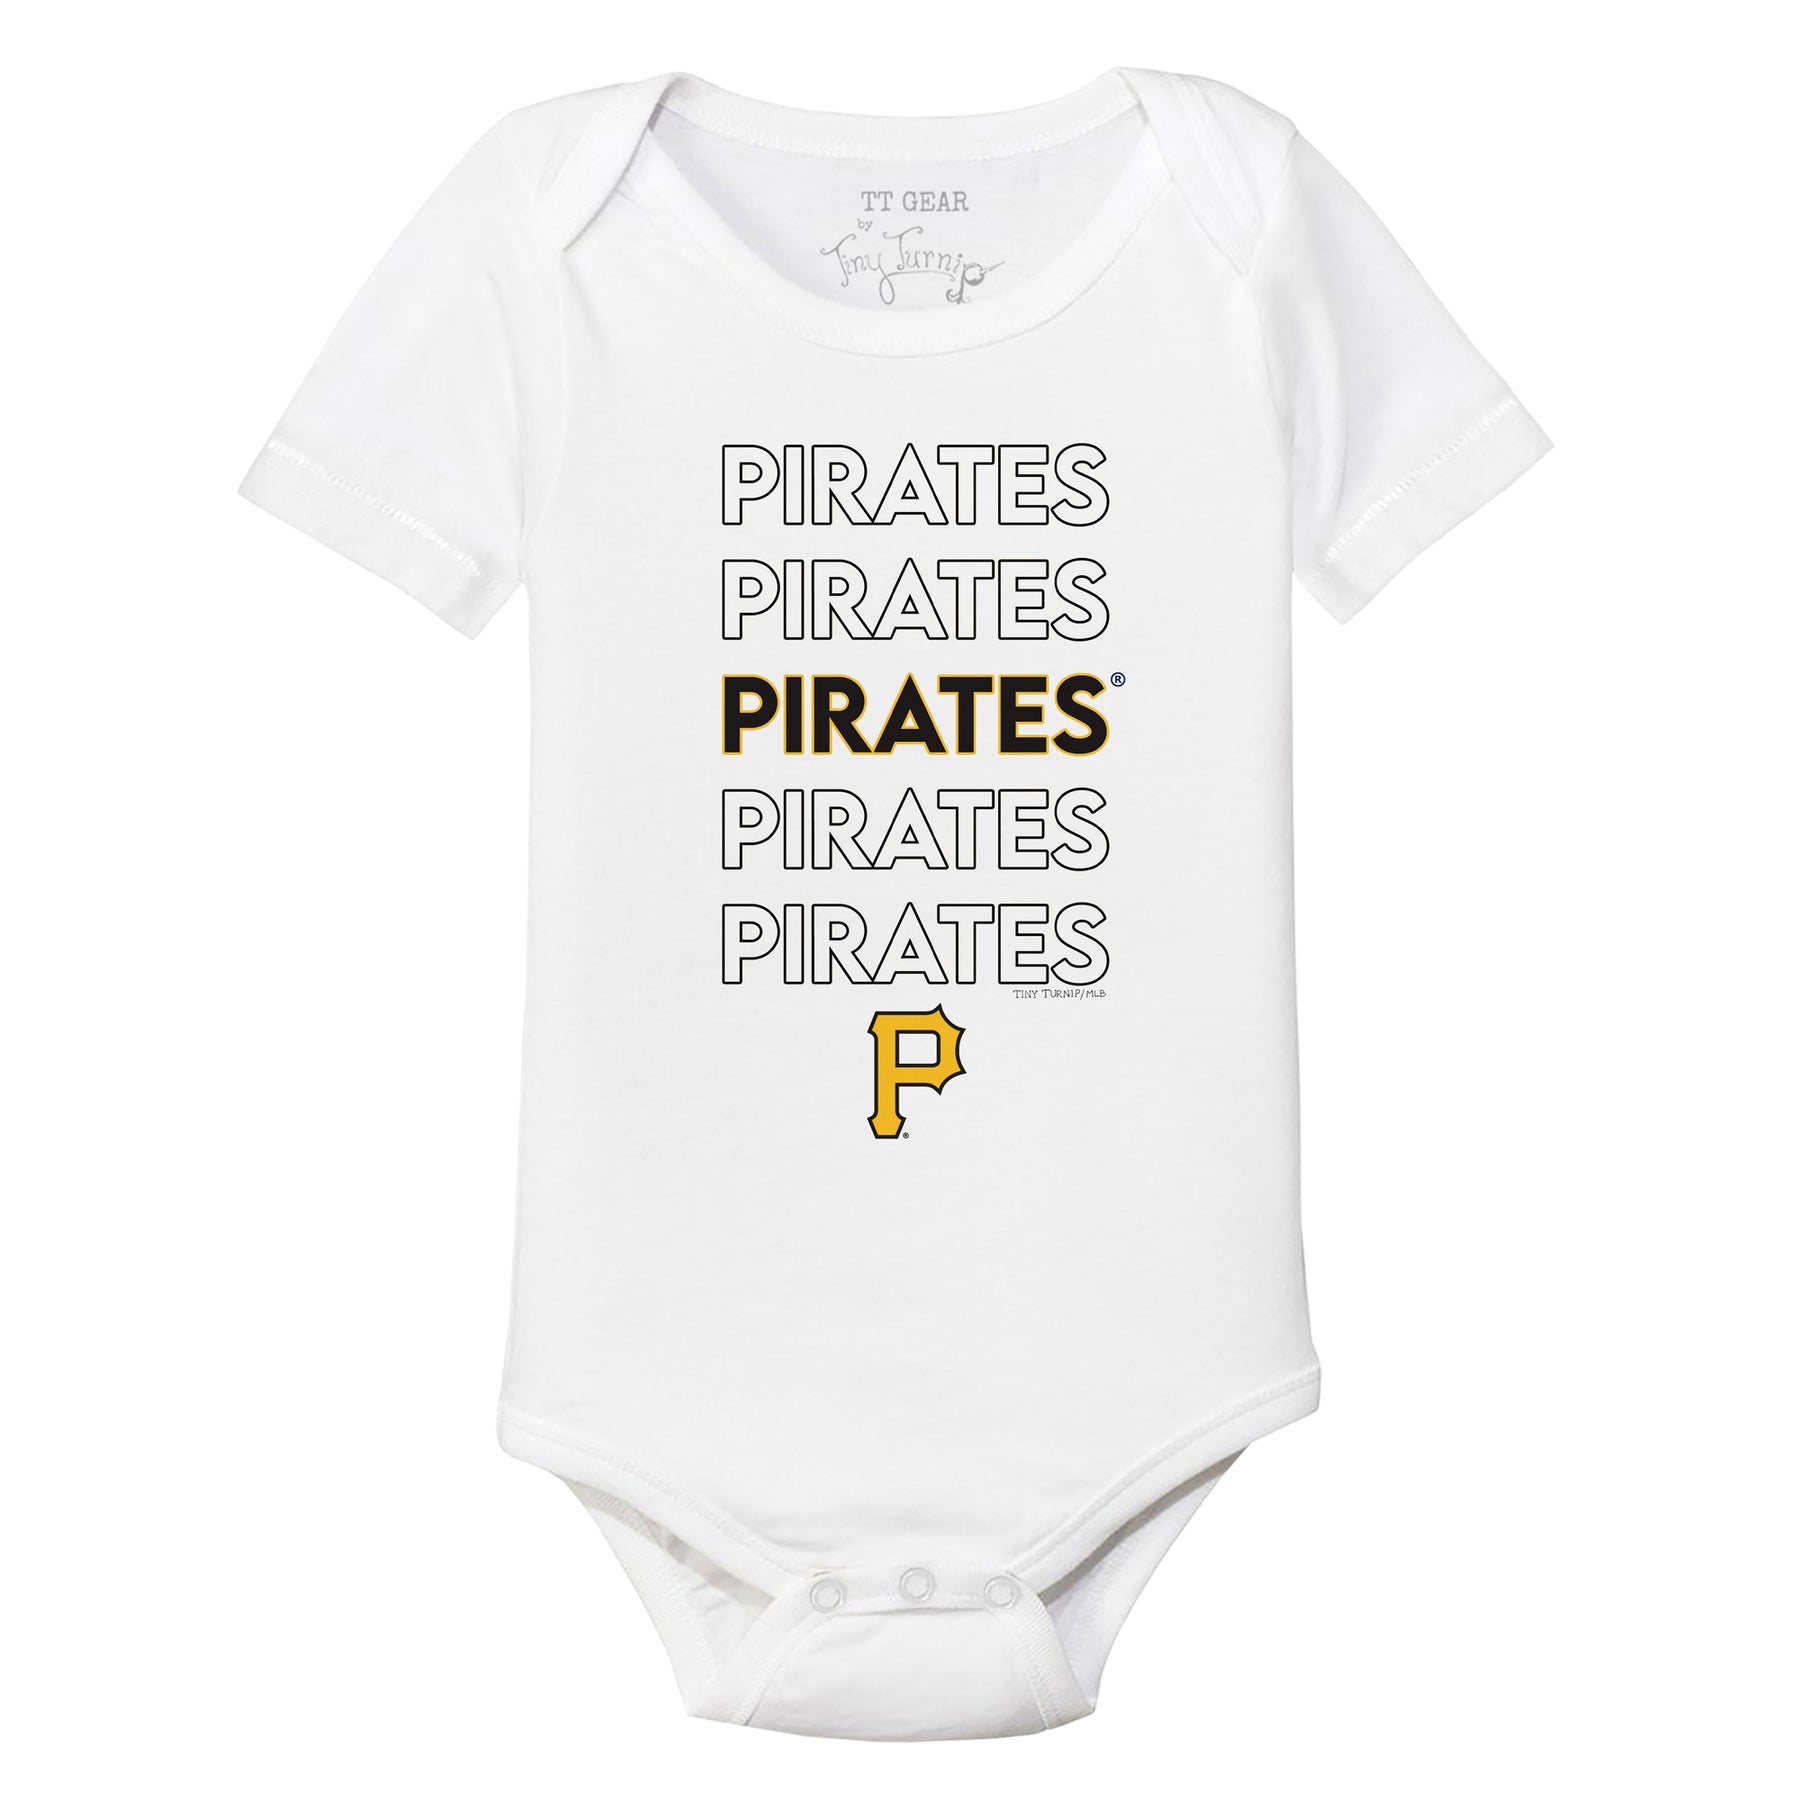 Pittsburgh Pirates Stacked Short Sleeve Snapper